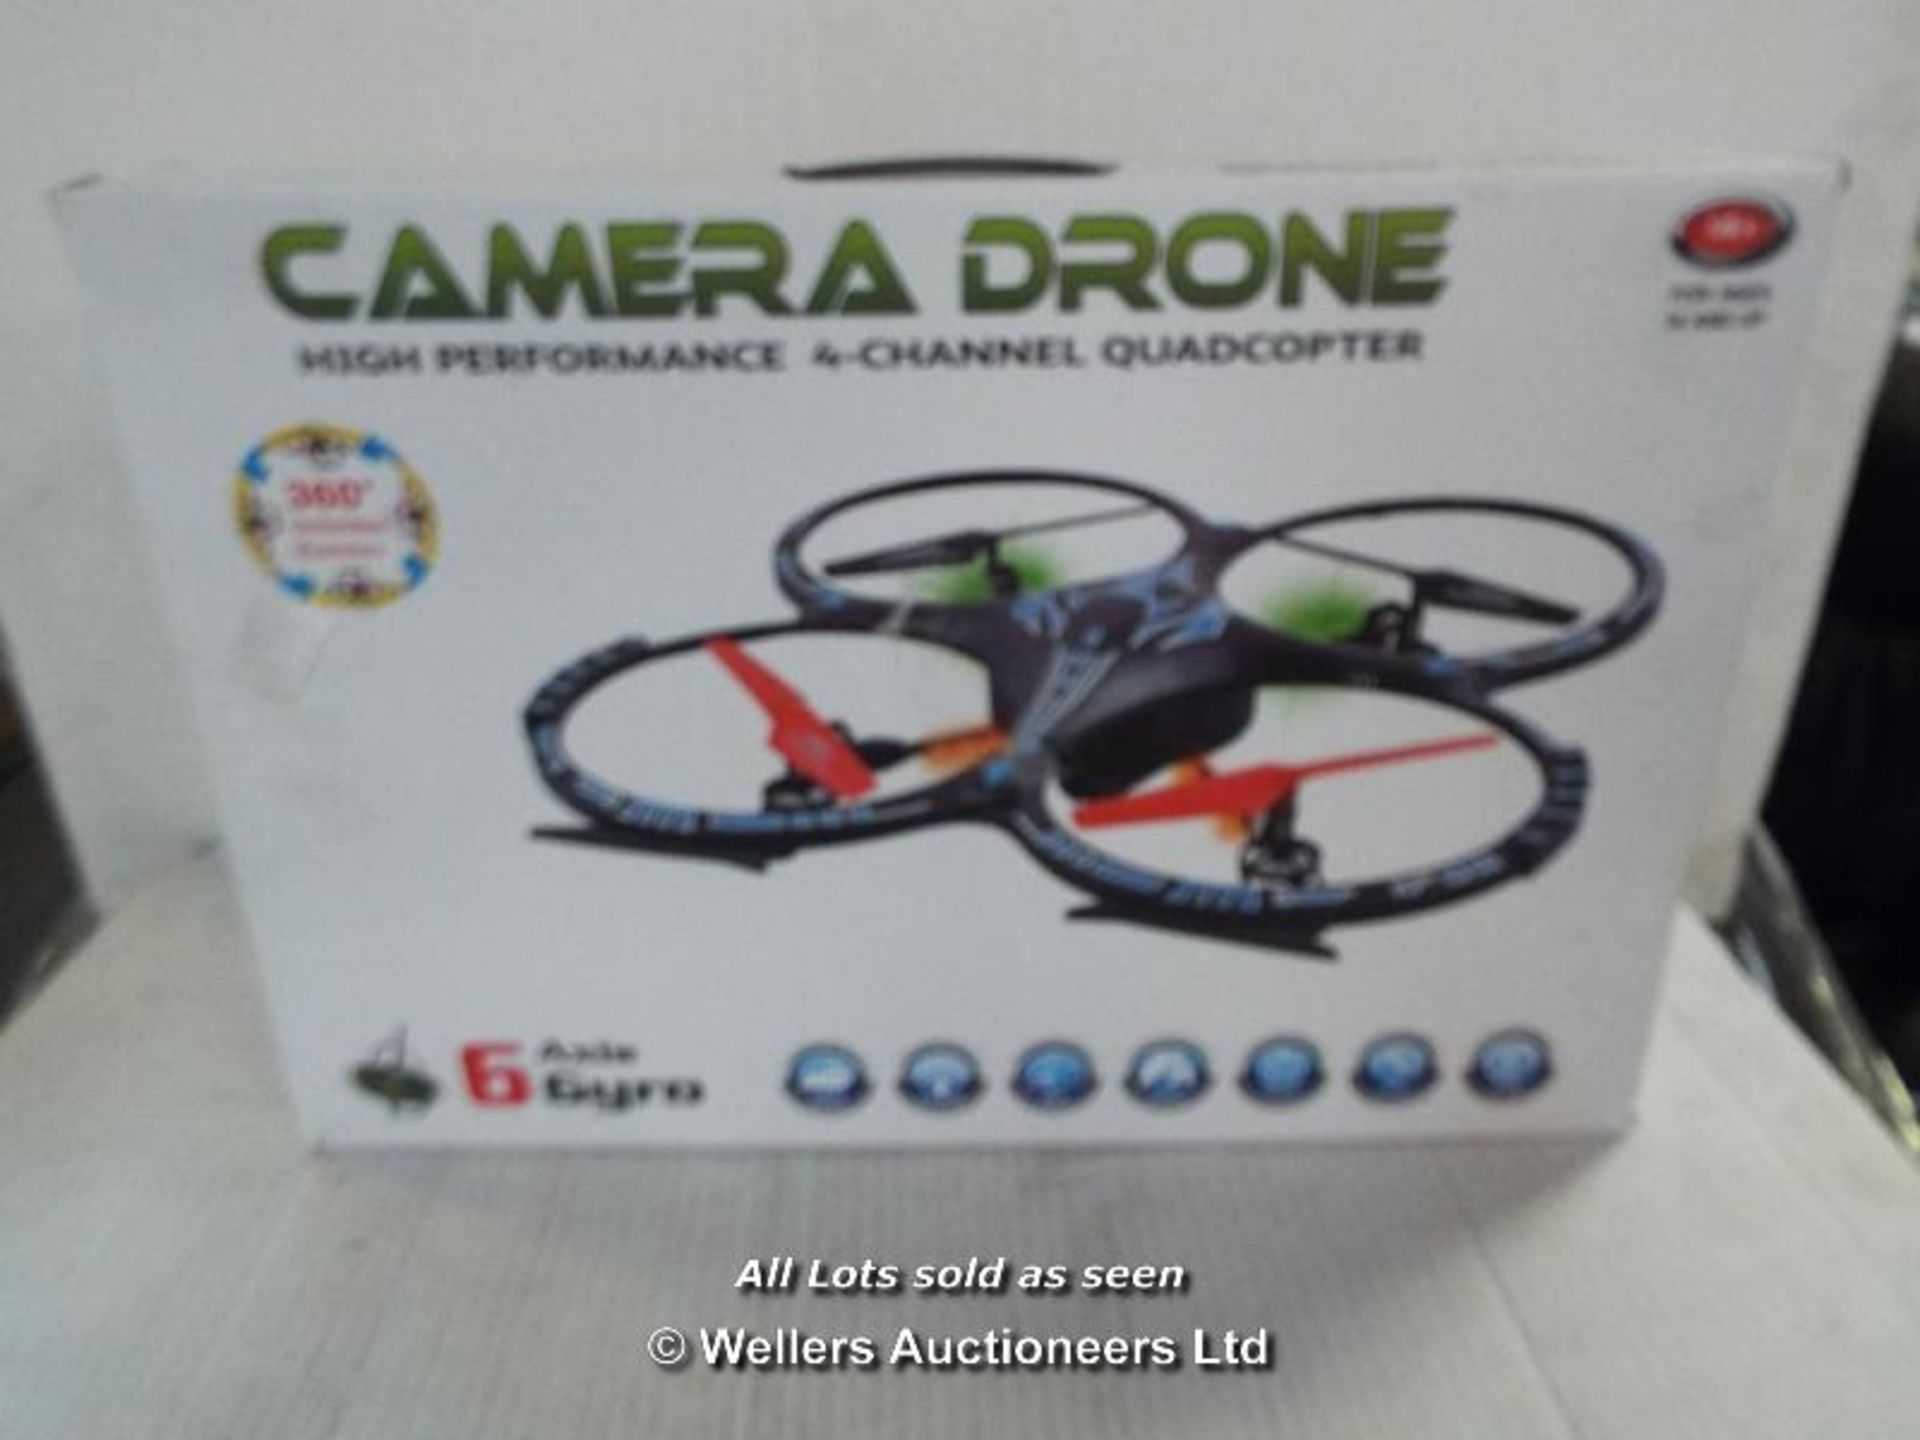 RC 2.4GHZ 4CH 6 AXIS GYRO QUADCOPTER WITH CAMERA N43DS / GRADE: RETURNS / BOXED (DC3) [AISLE 19] - Image 2 of 2